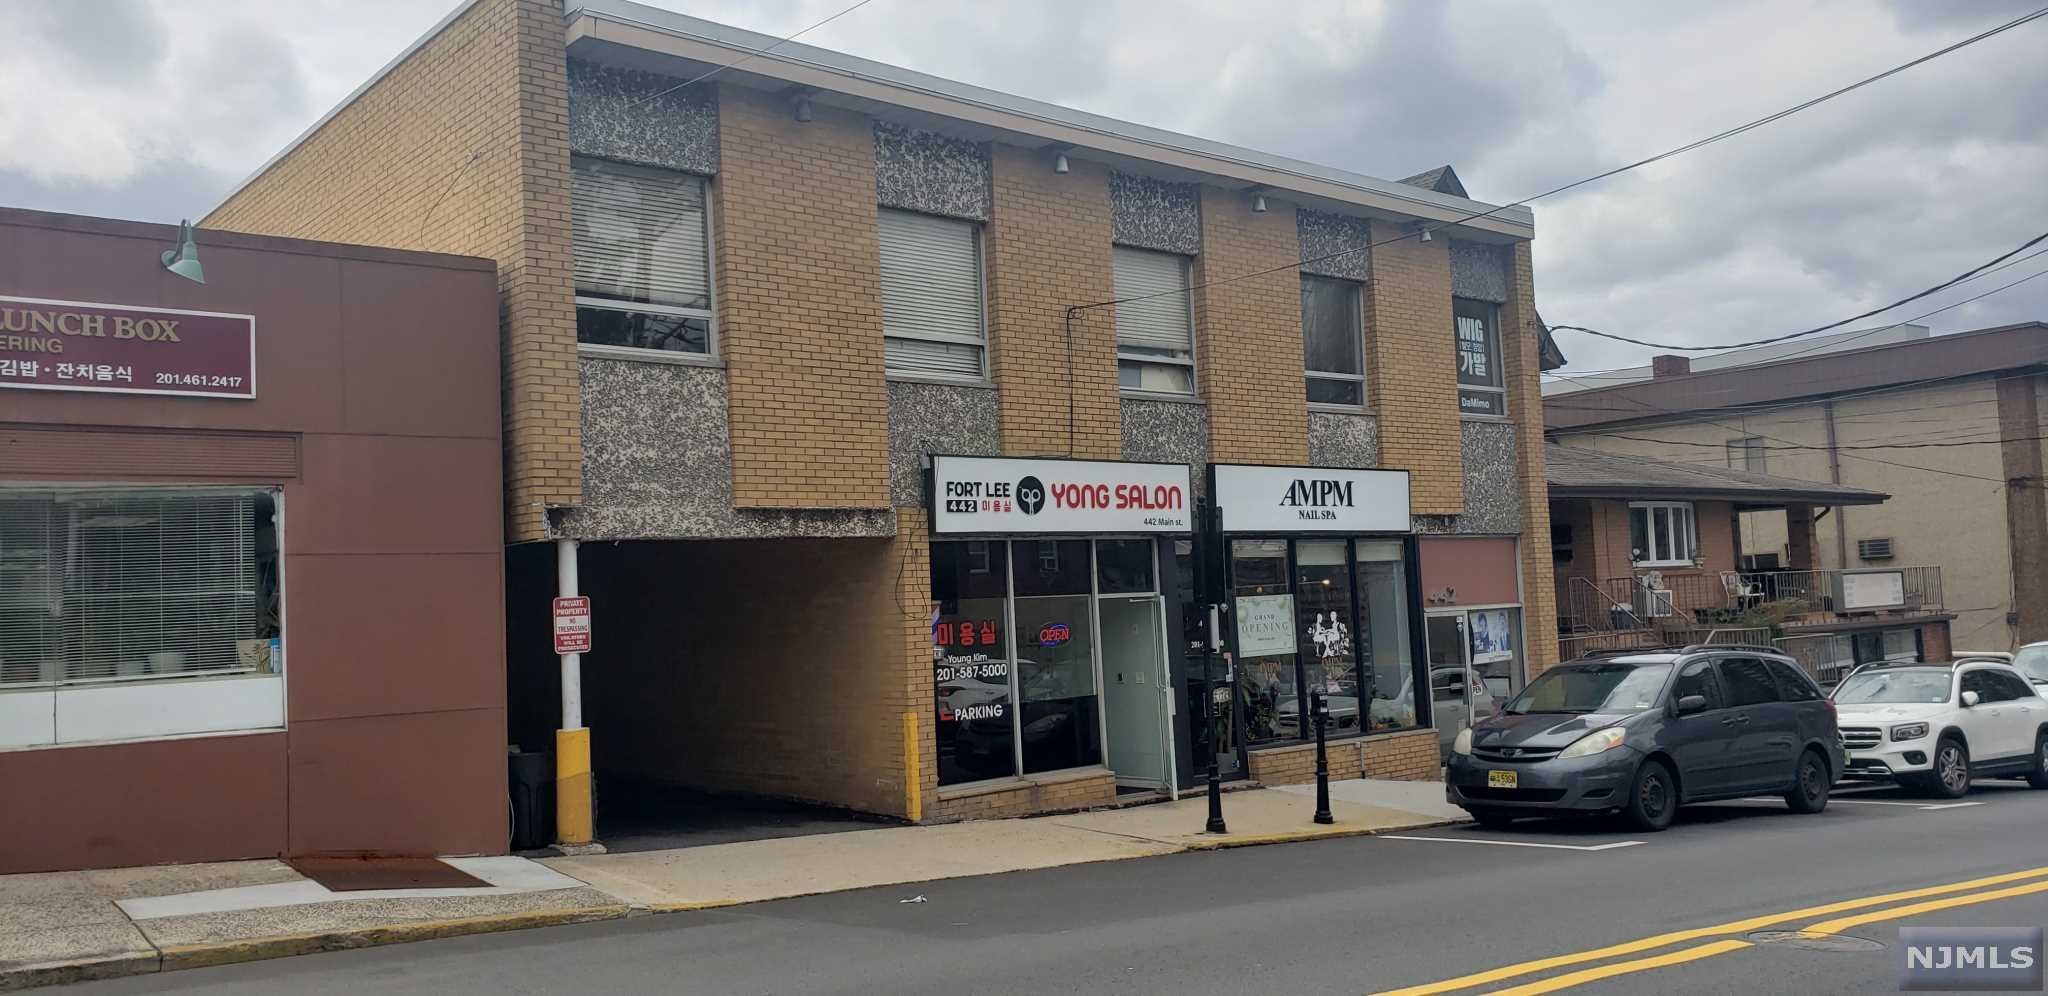 MLS Number 22013960 - Commercial Property for $ 2,500, - 442 Main  Street, Fort Lee, NJ - New Jersey Multiple Listing Service